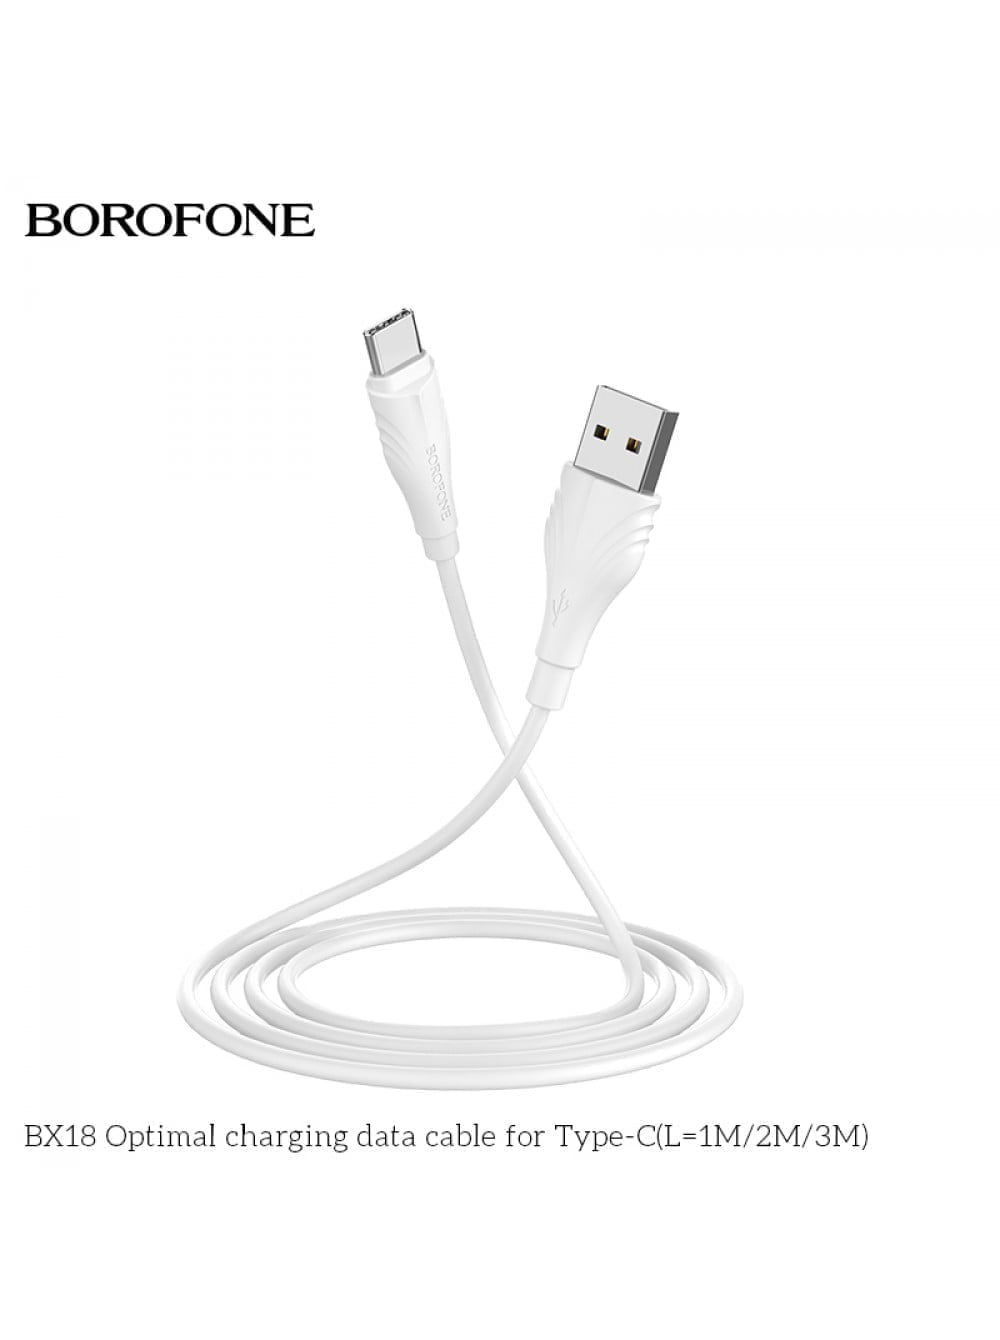 3 1000X1340 1 Hoco Borofone Usb Cable Bx18 Optimal Charging Data Cable For Type-C (L = 2M) Color: White